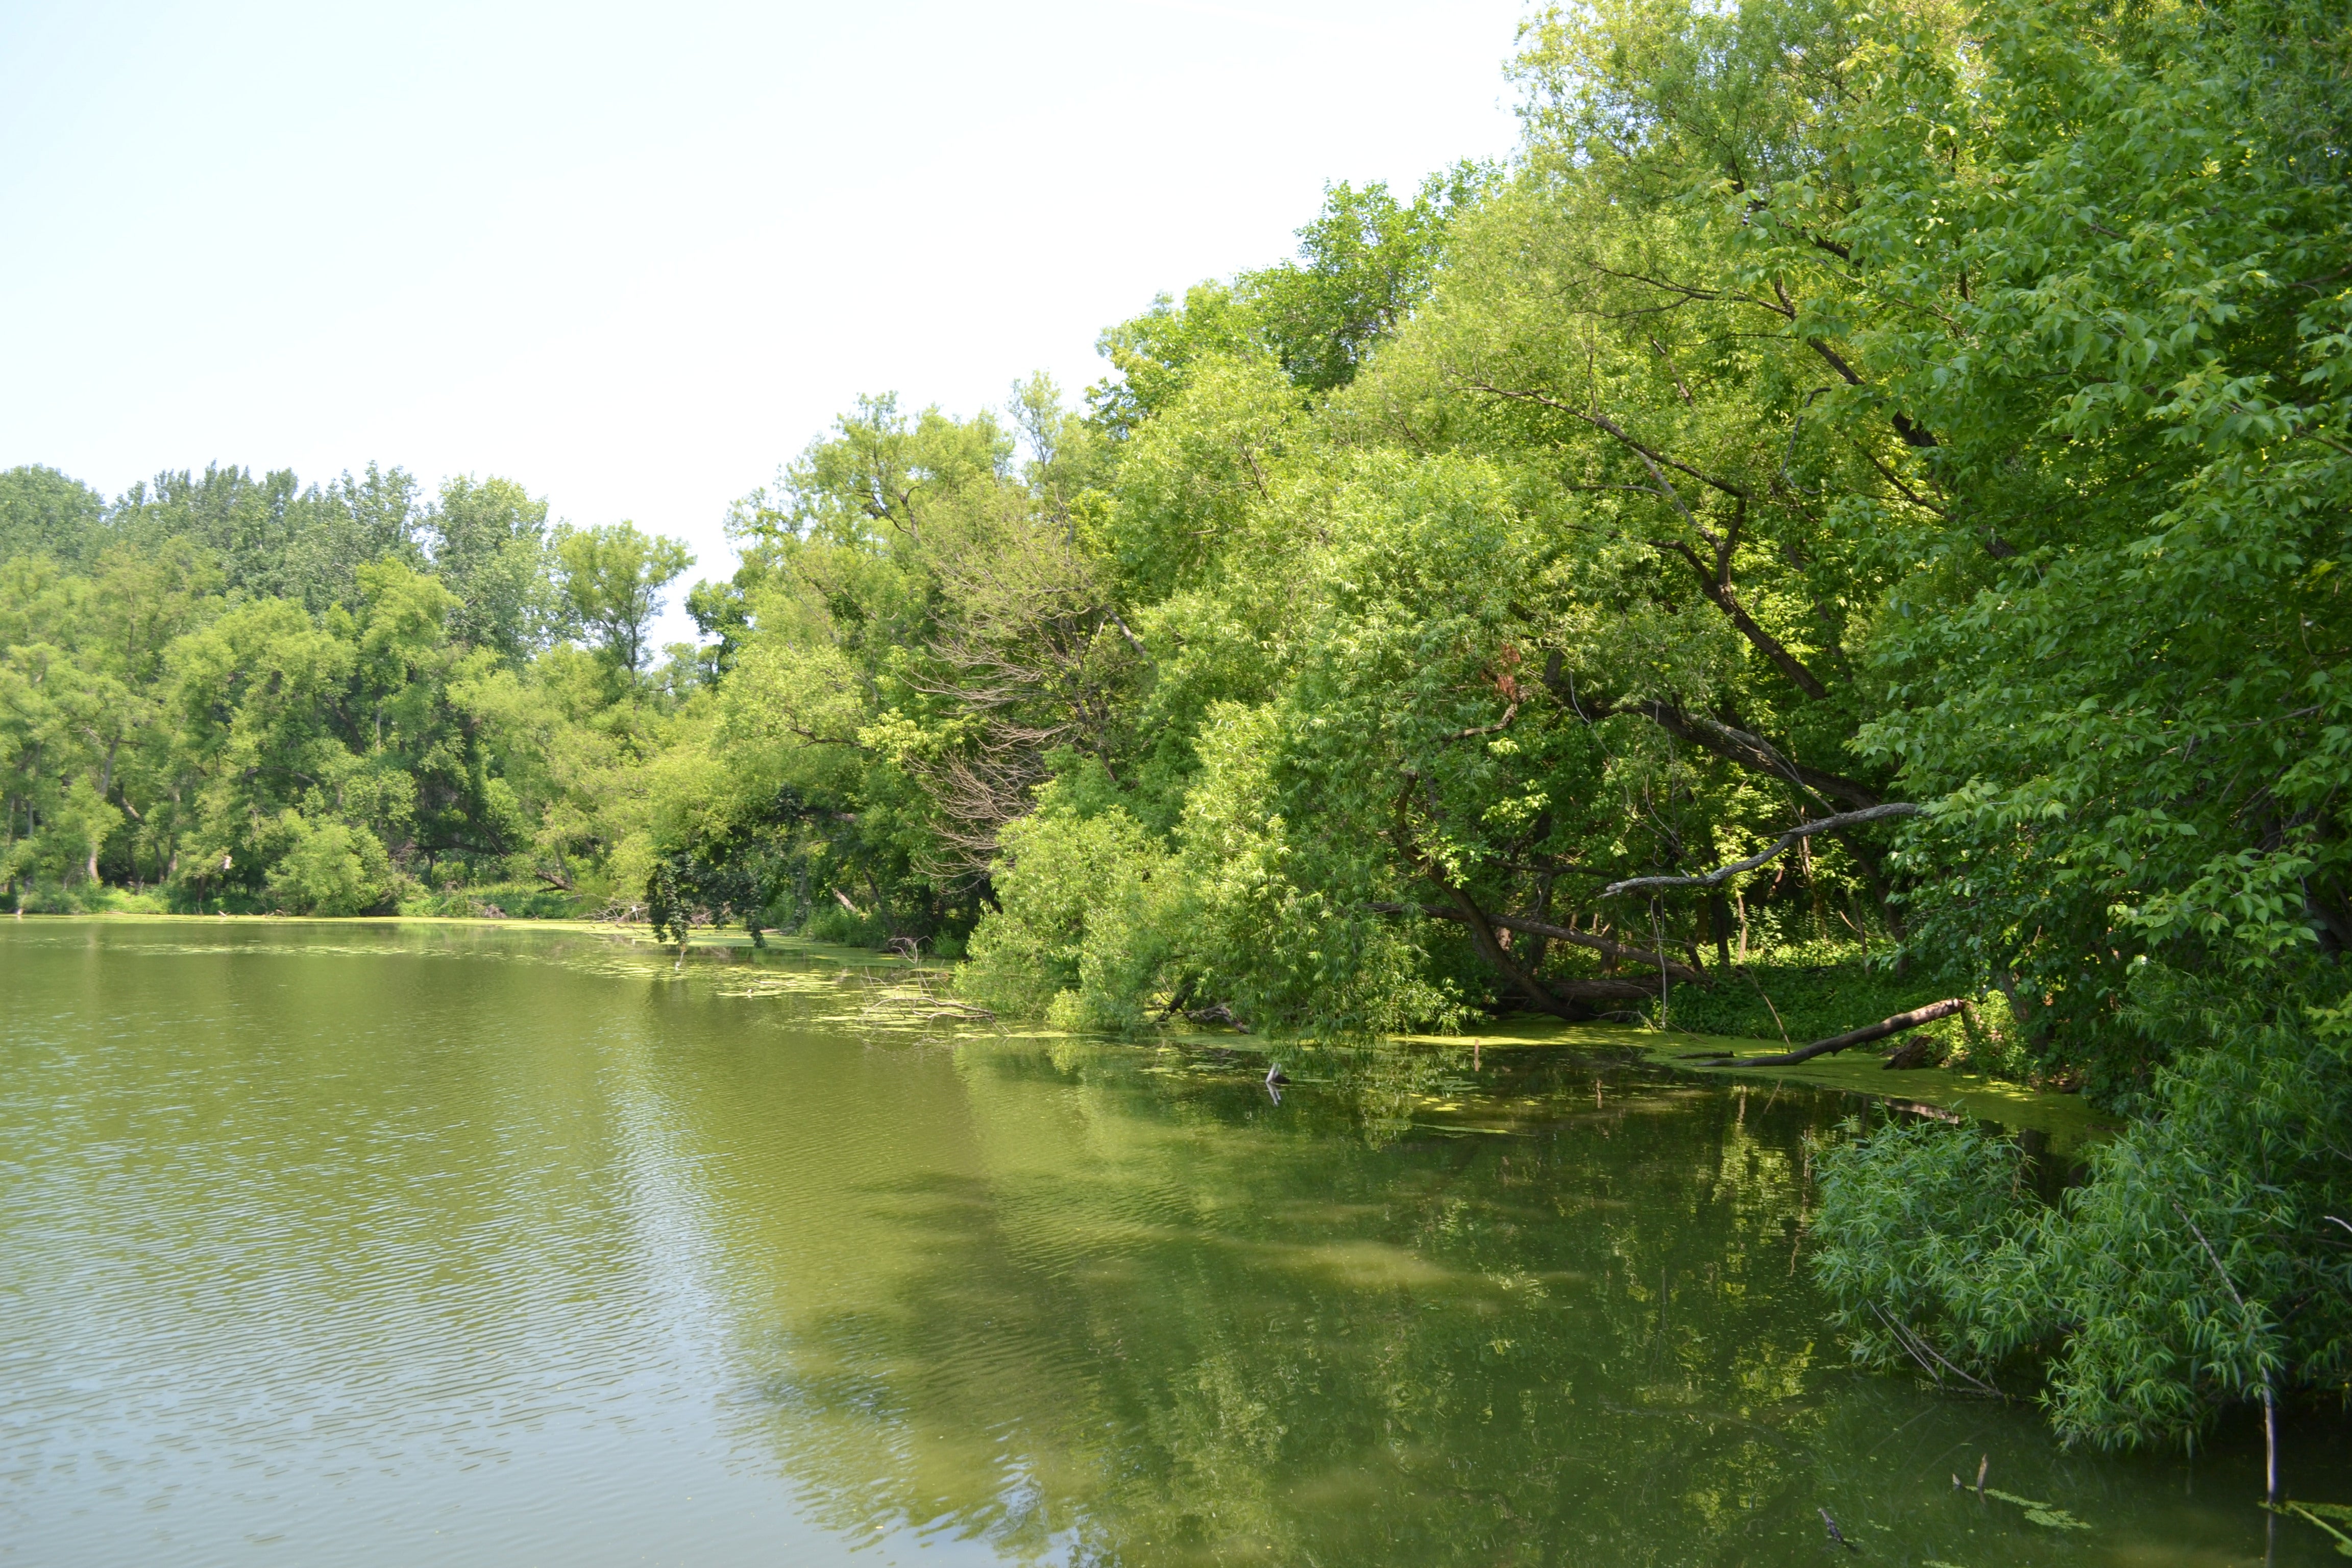 There are small, quiet ponds with access for fishing and/or bird watching